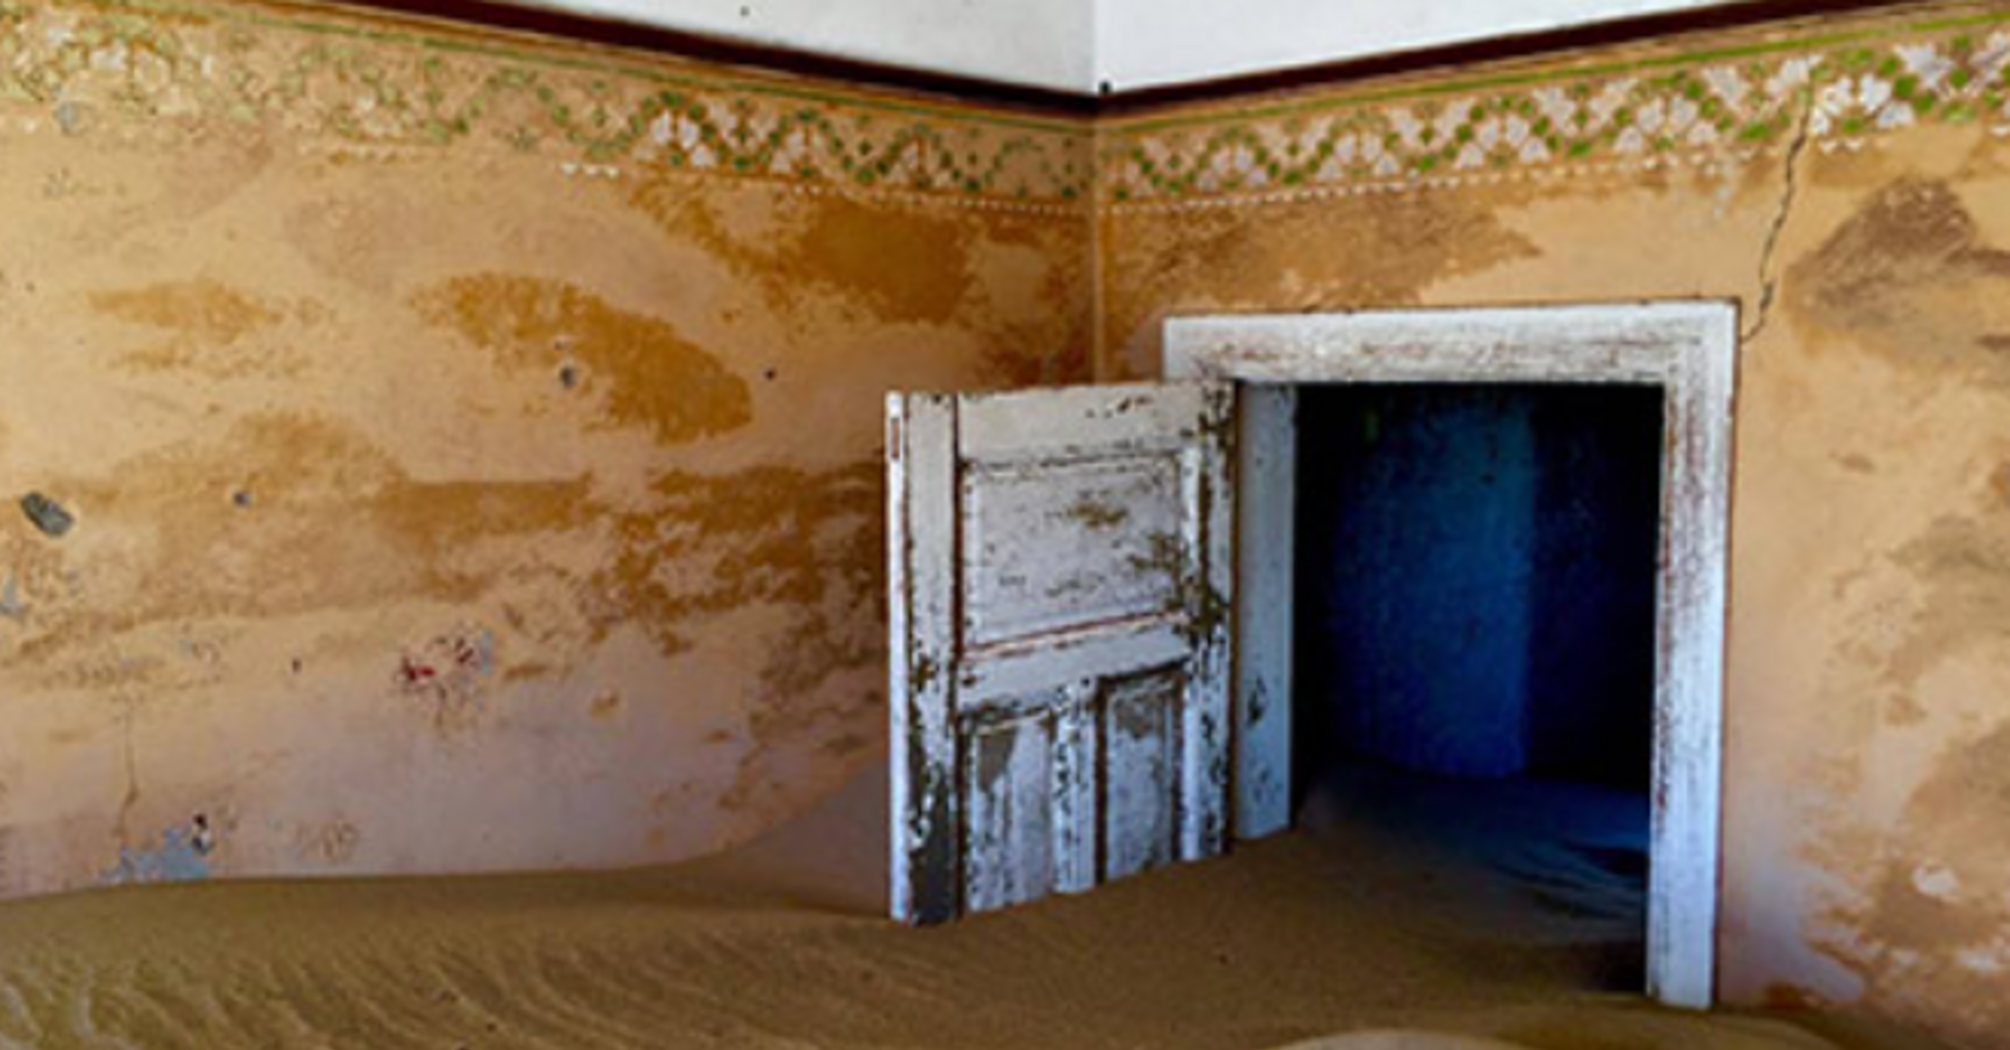 The richest settlement has become a ghost town: Kolmanskop in Namibia sinks into the sand